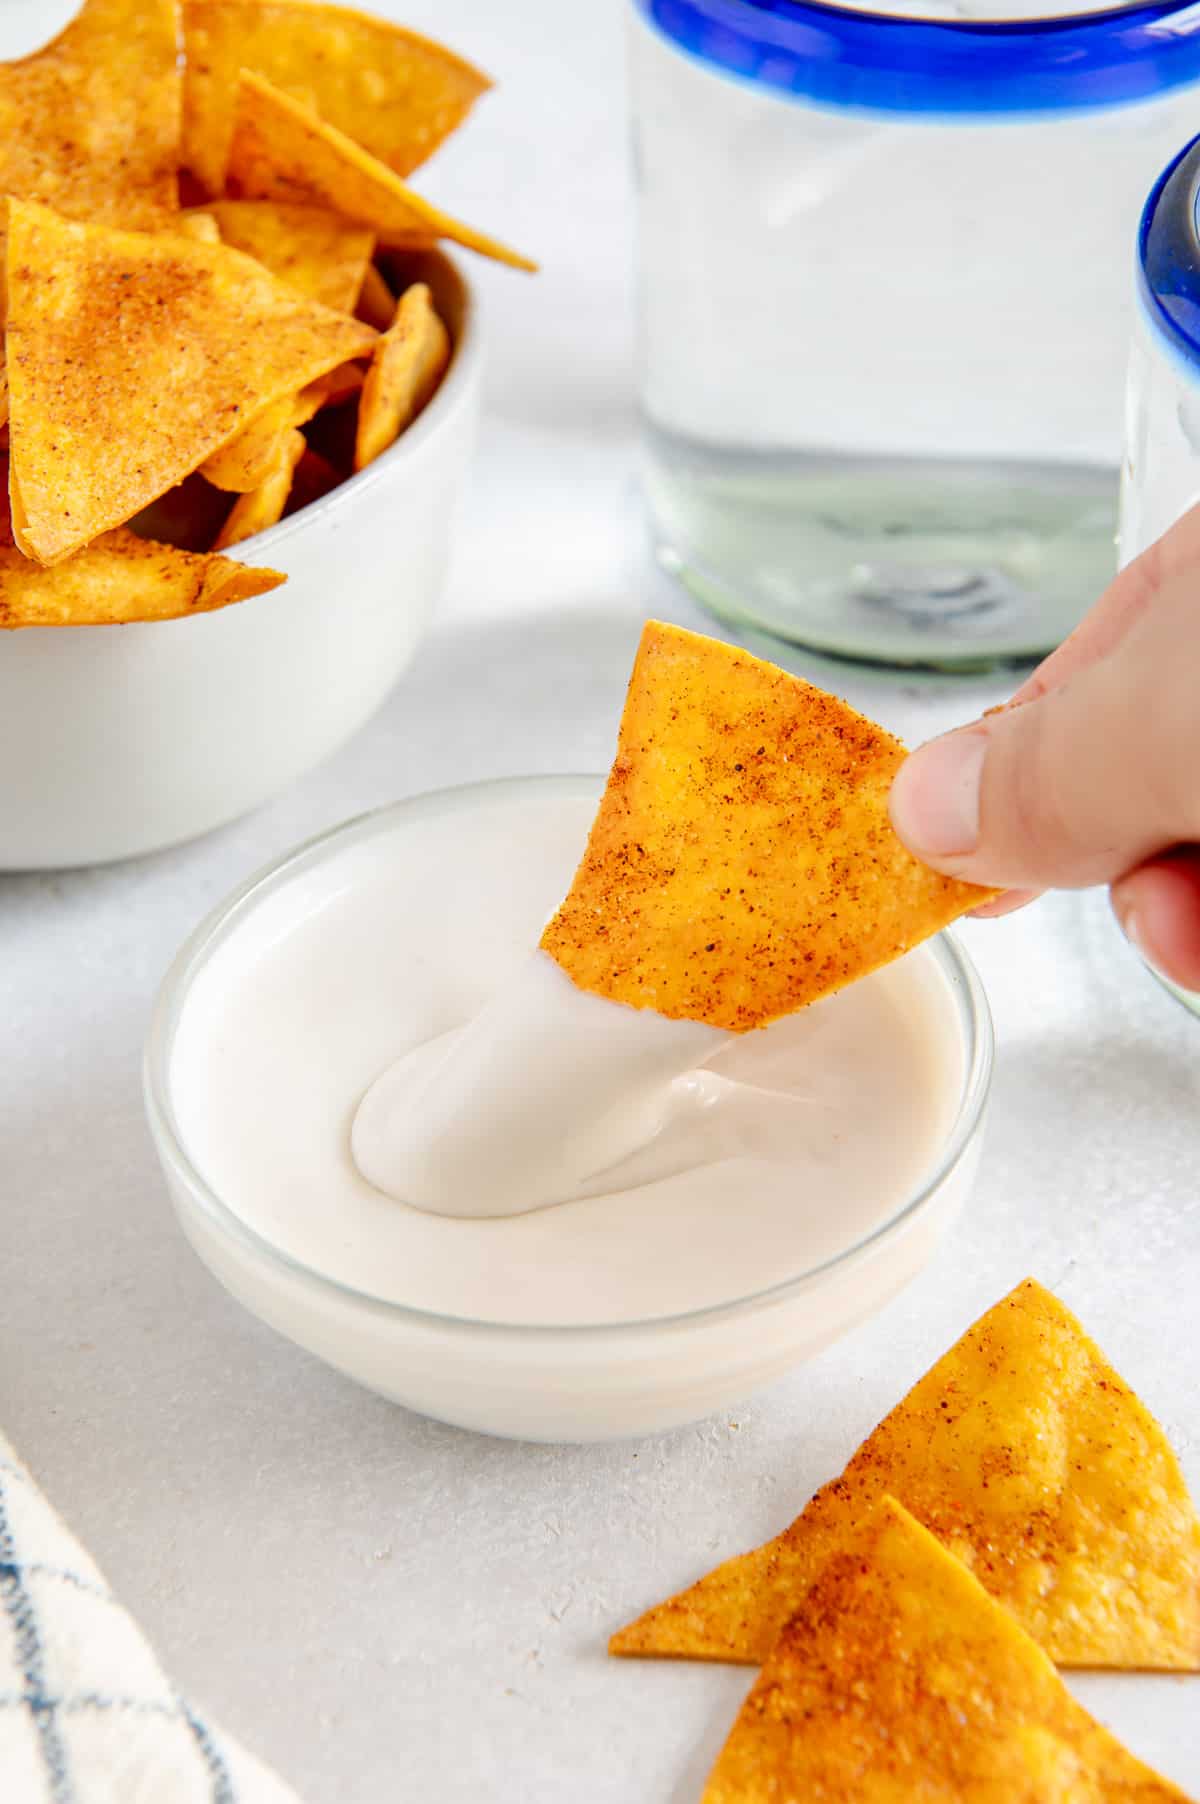 A homemade tortilla chip being dipped in sour cream.